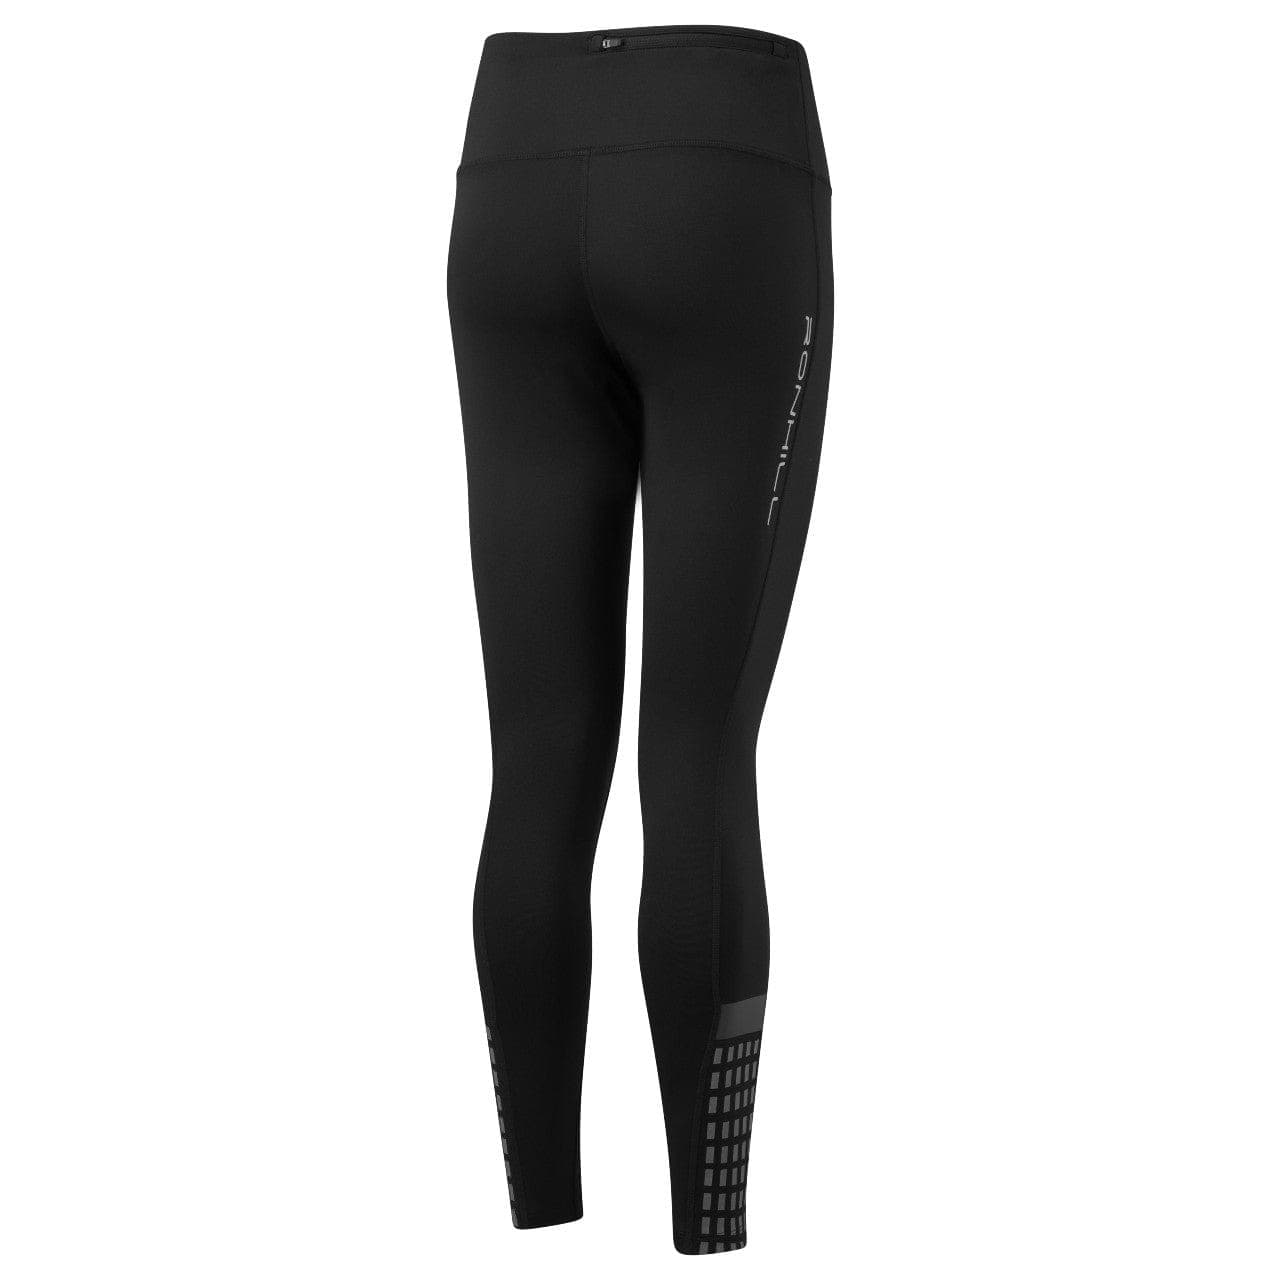 Ronhill Tech Afterhours Tight (Womens) - Black/Charcoal/Reflective